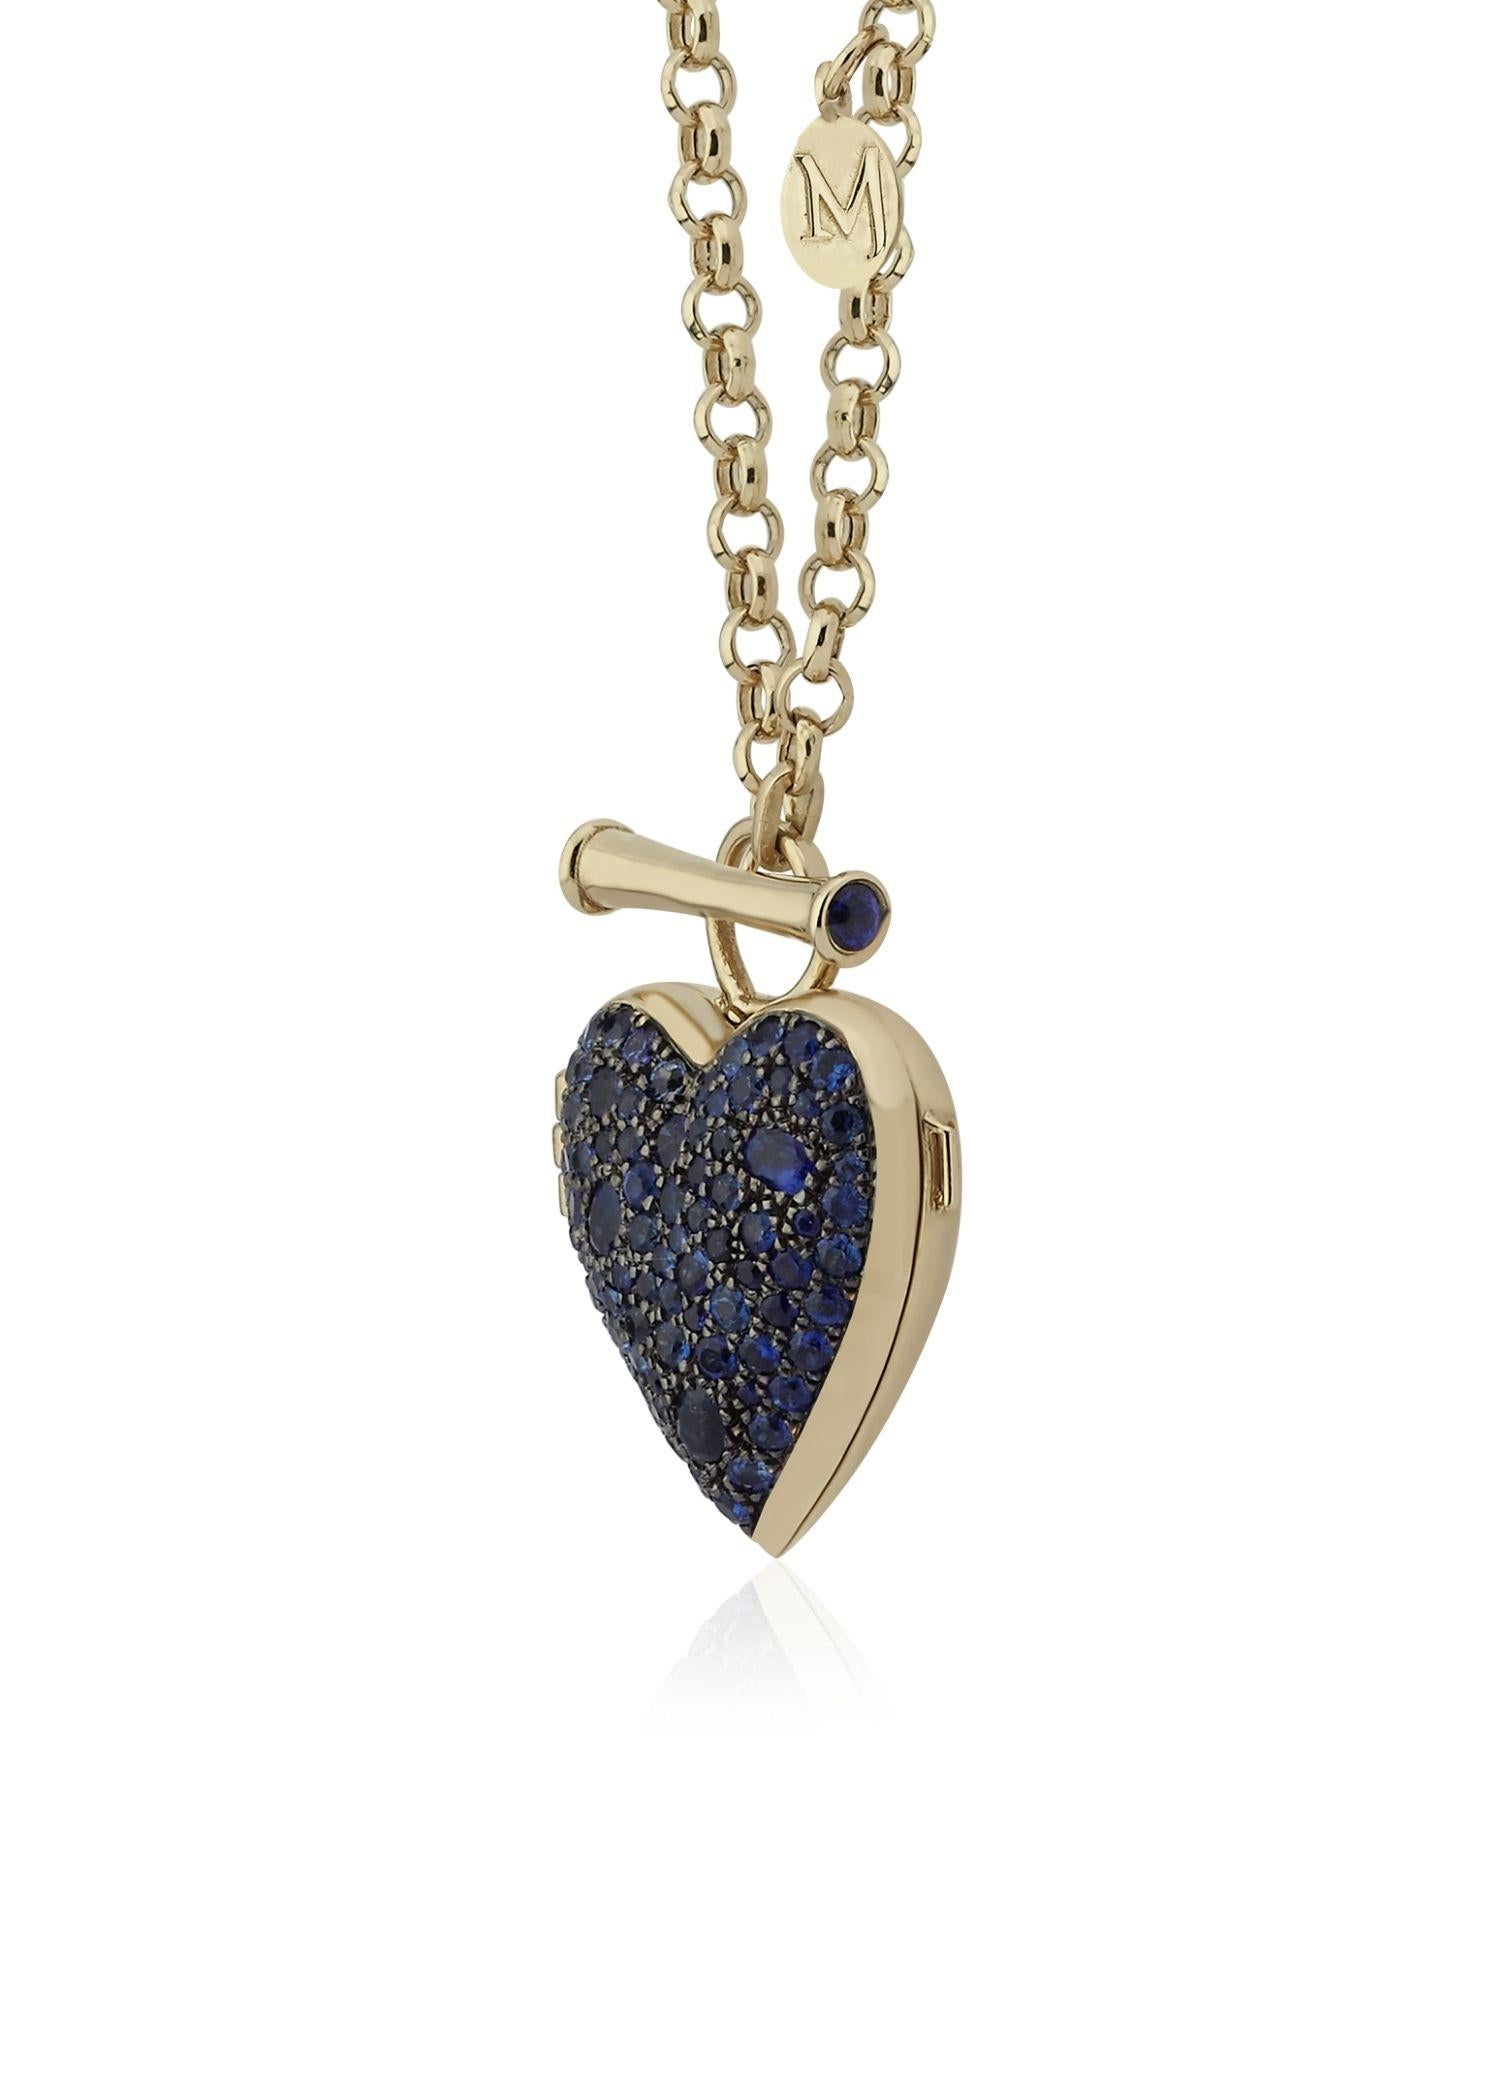 Melie Jewelry Heart Locket Necklace

14K Yellow Gold, 1.09 ct Blue Sapphire 
Locket Necklace comes with a gold 50 cm chain.

The Story Behind
Inspired by the phrase 